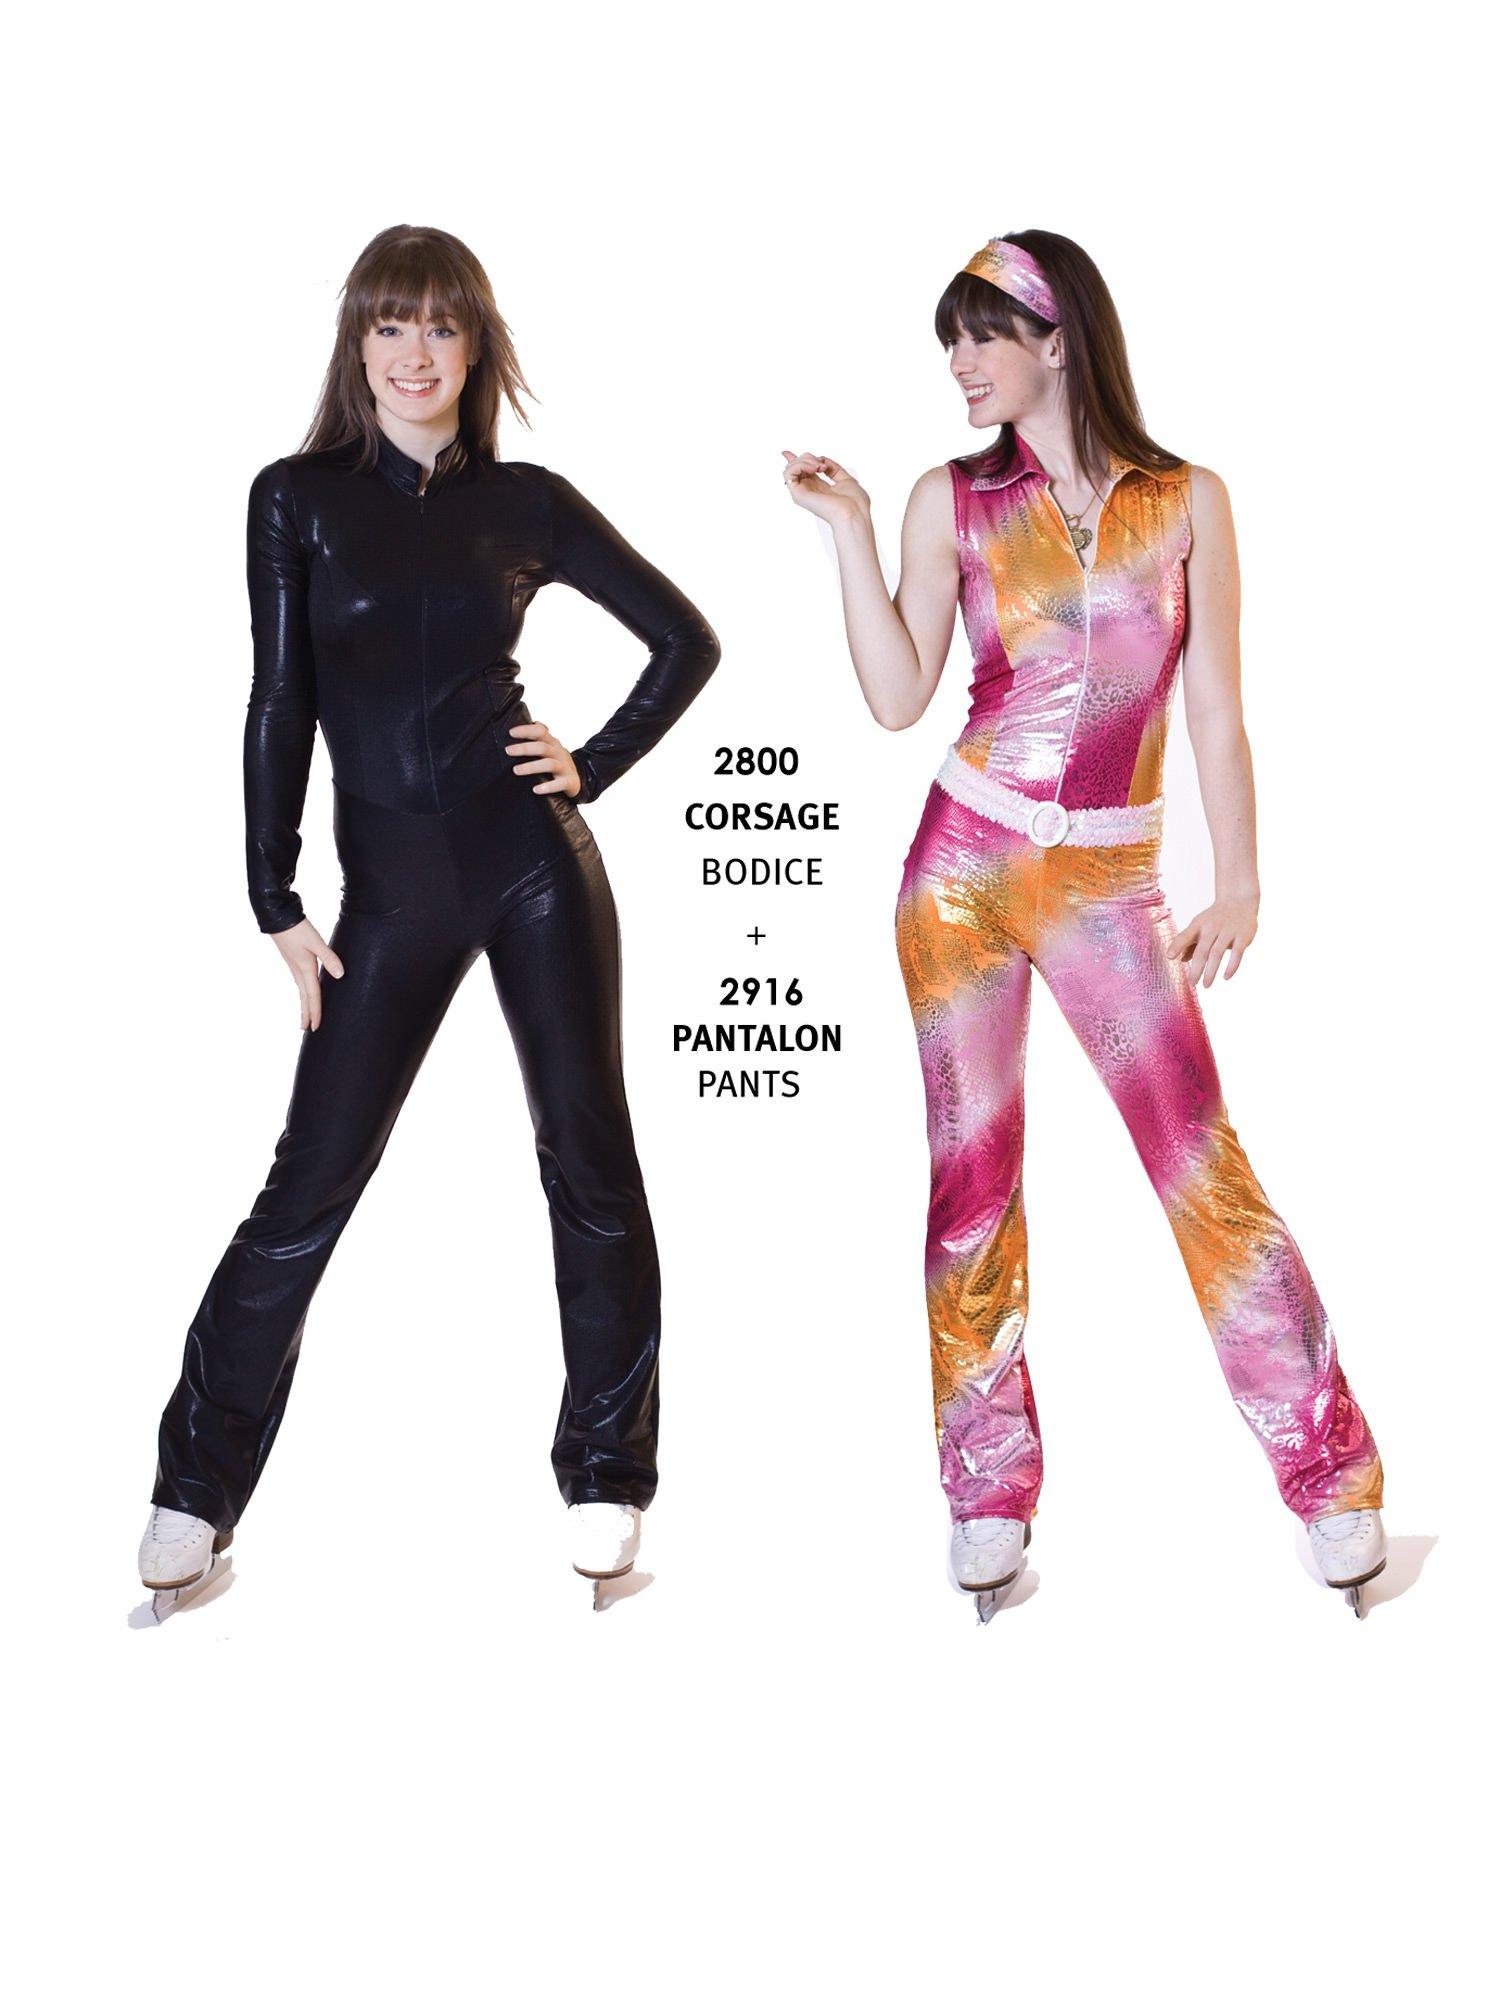 Make a catsuit with the 2916 pants and 2800 bodice